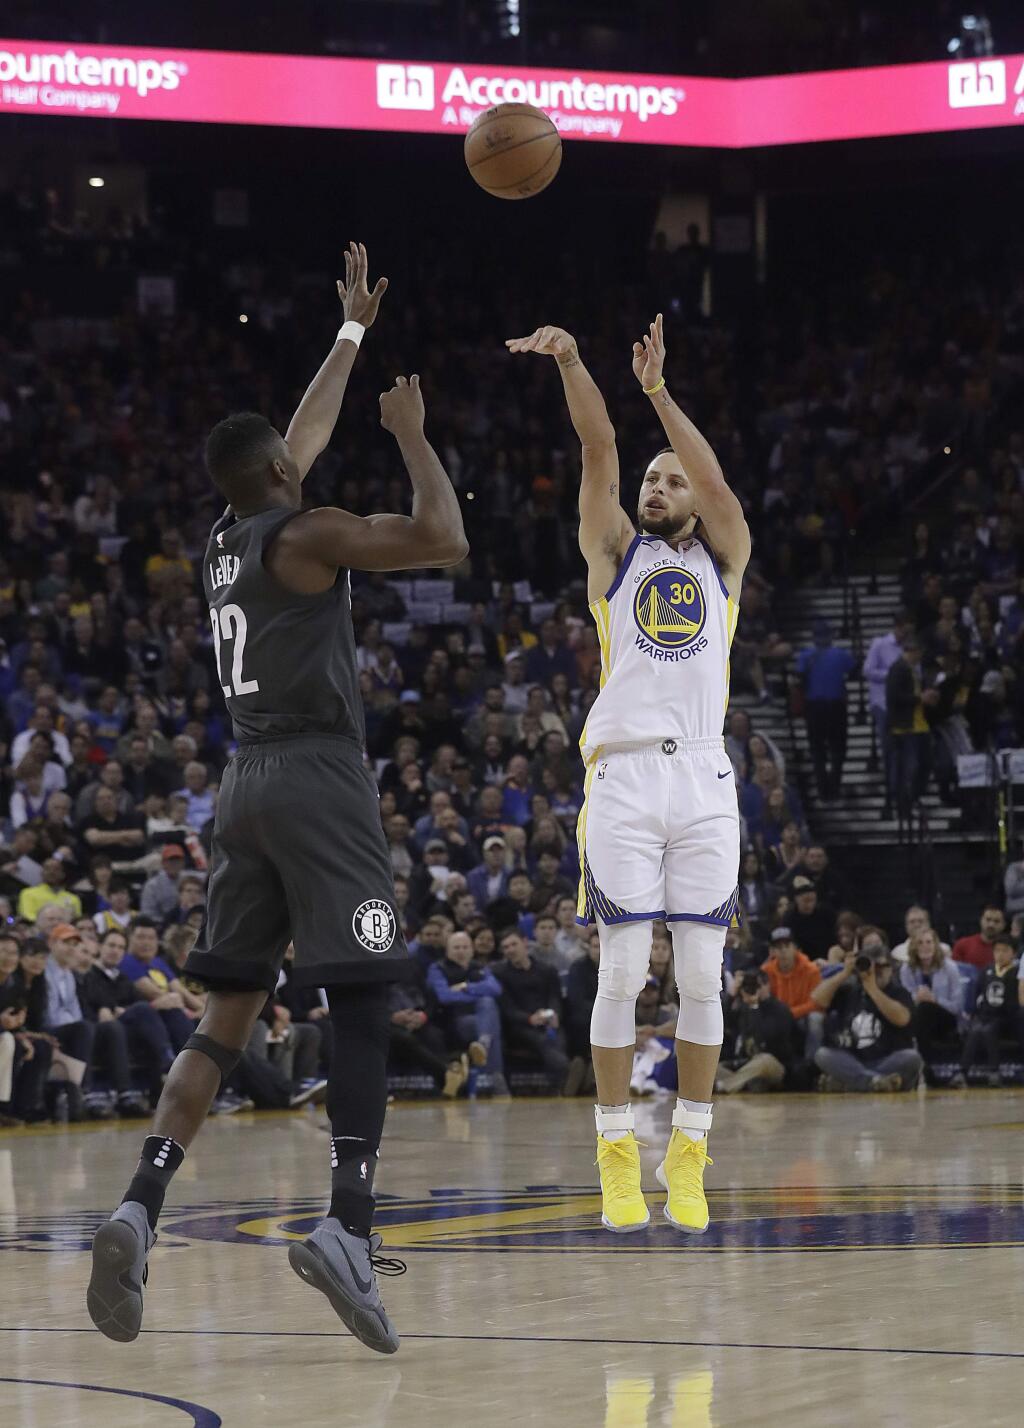 Golden State Warriors guard Stephen Curry (30) shoots over Brooklyn Nets guard Caris LeVert (22) during the first half of an NBA basketball game in Oakland, Calif., Tuesday, March 6, 2018. (AP Photo/Jeff Chiu)